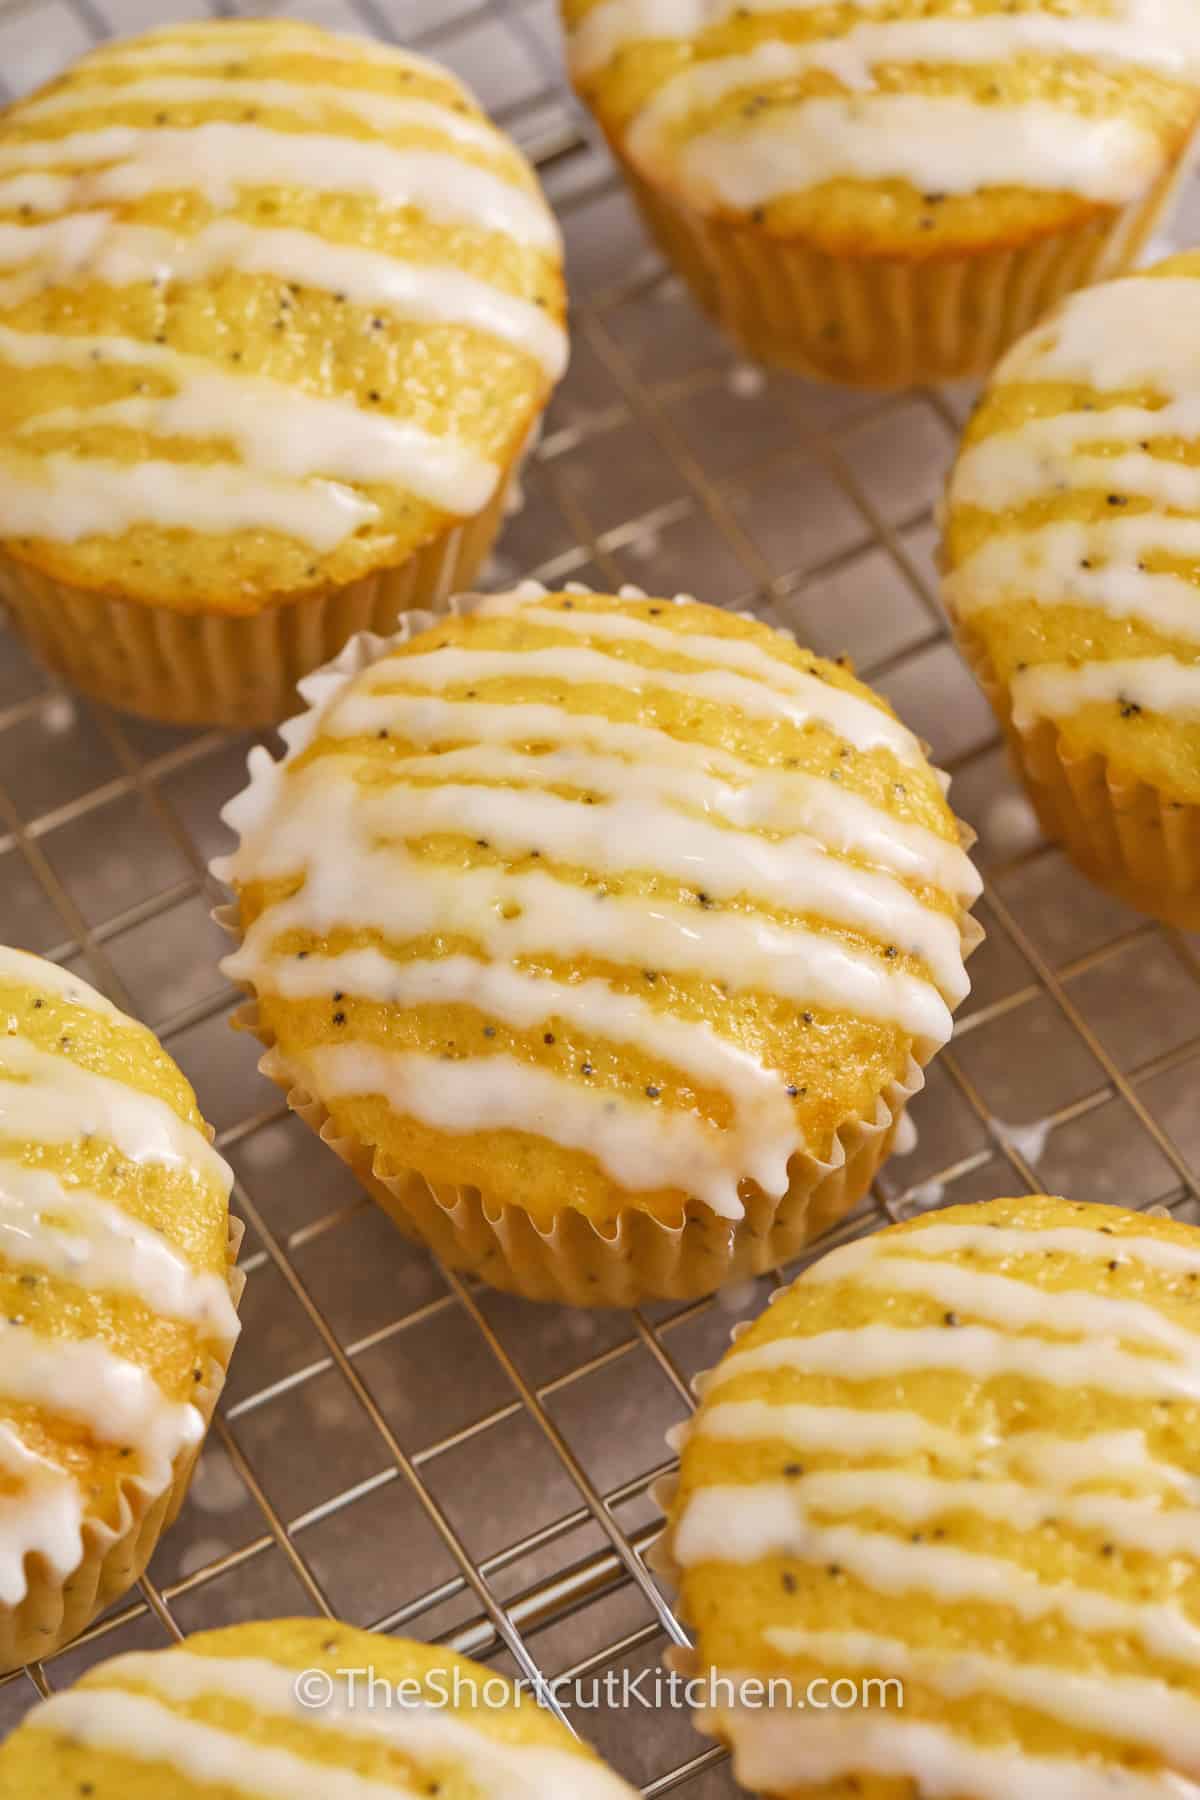 Lemon poppyseed muffins drizzled with glaze